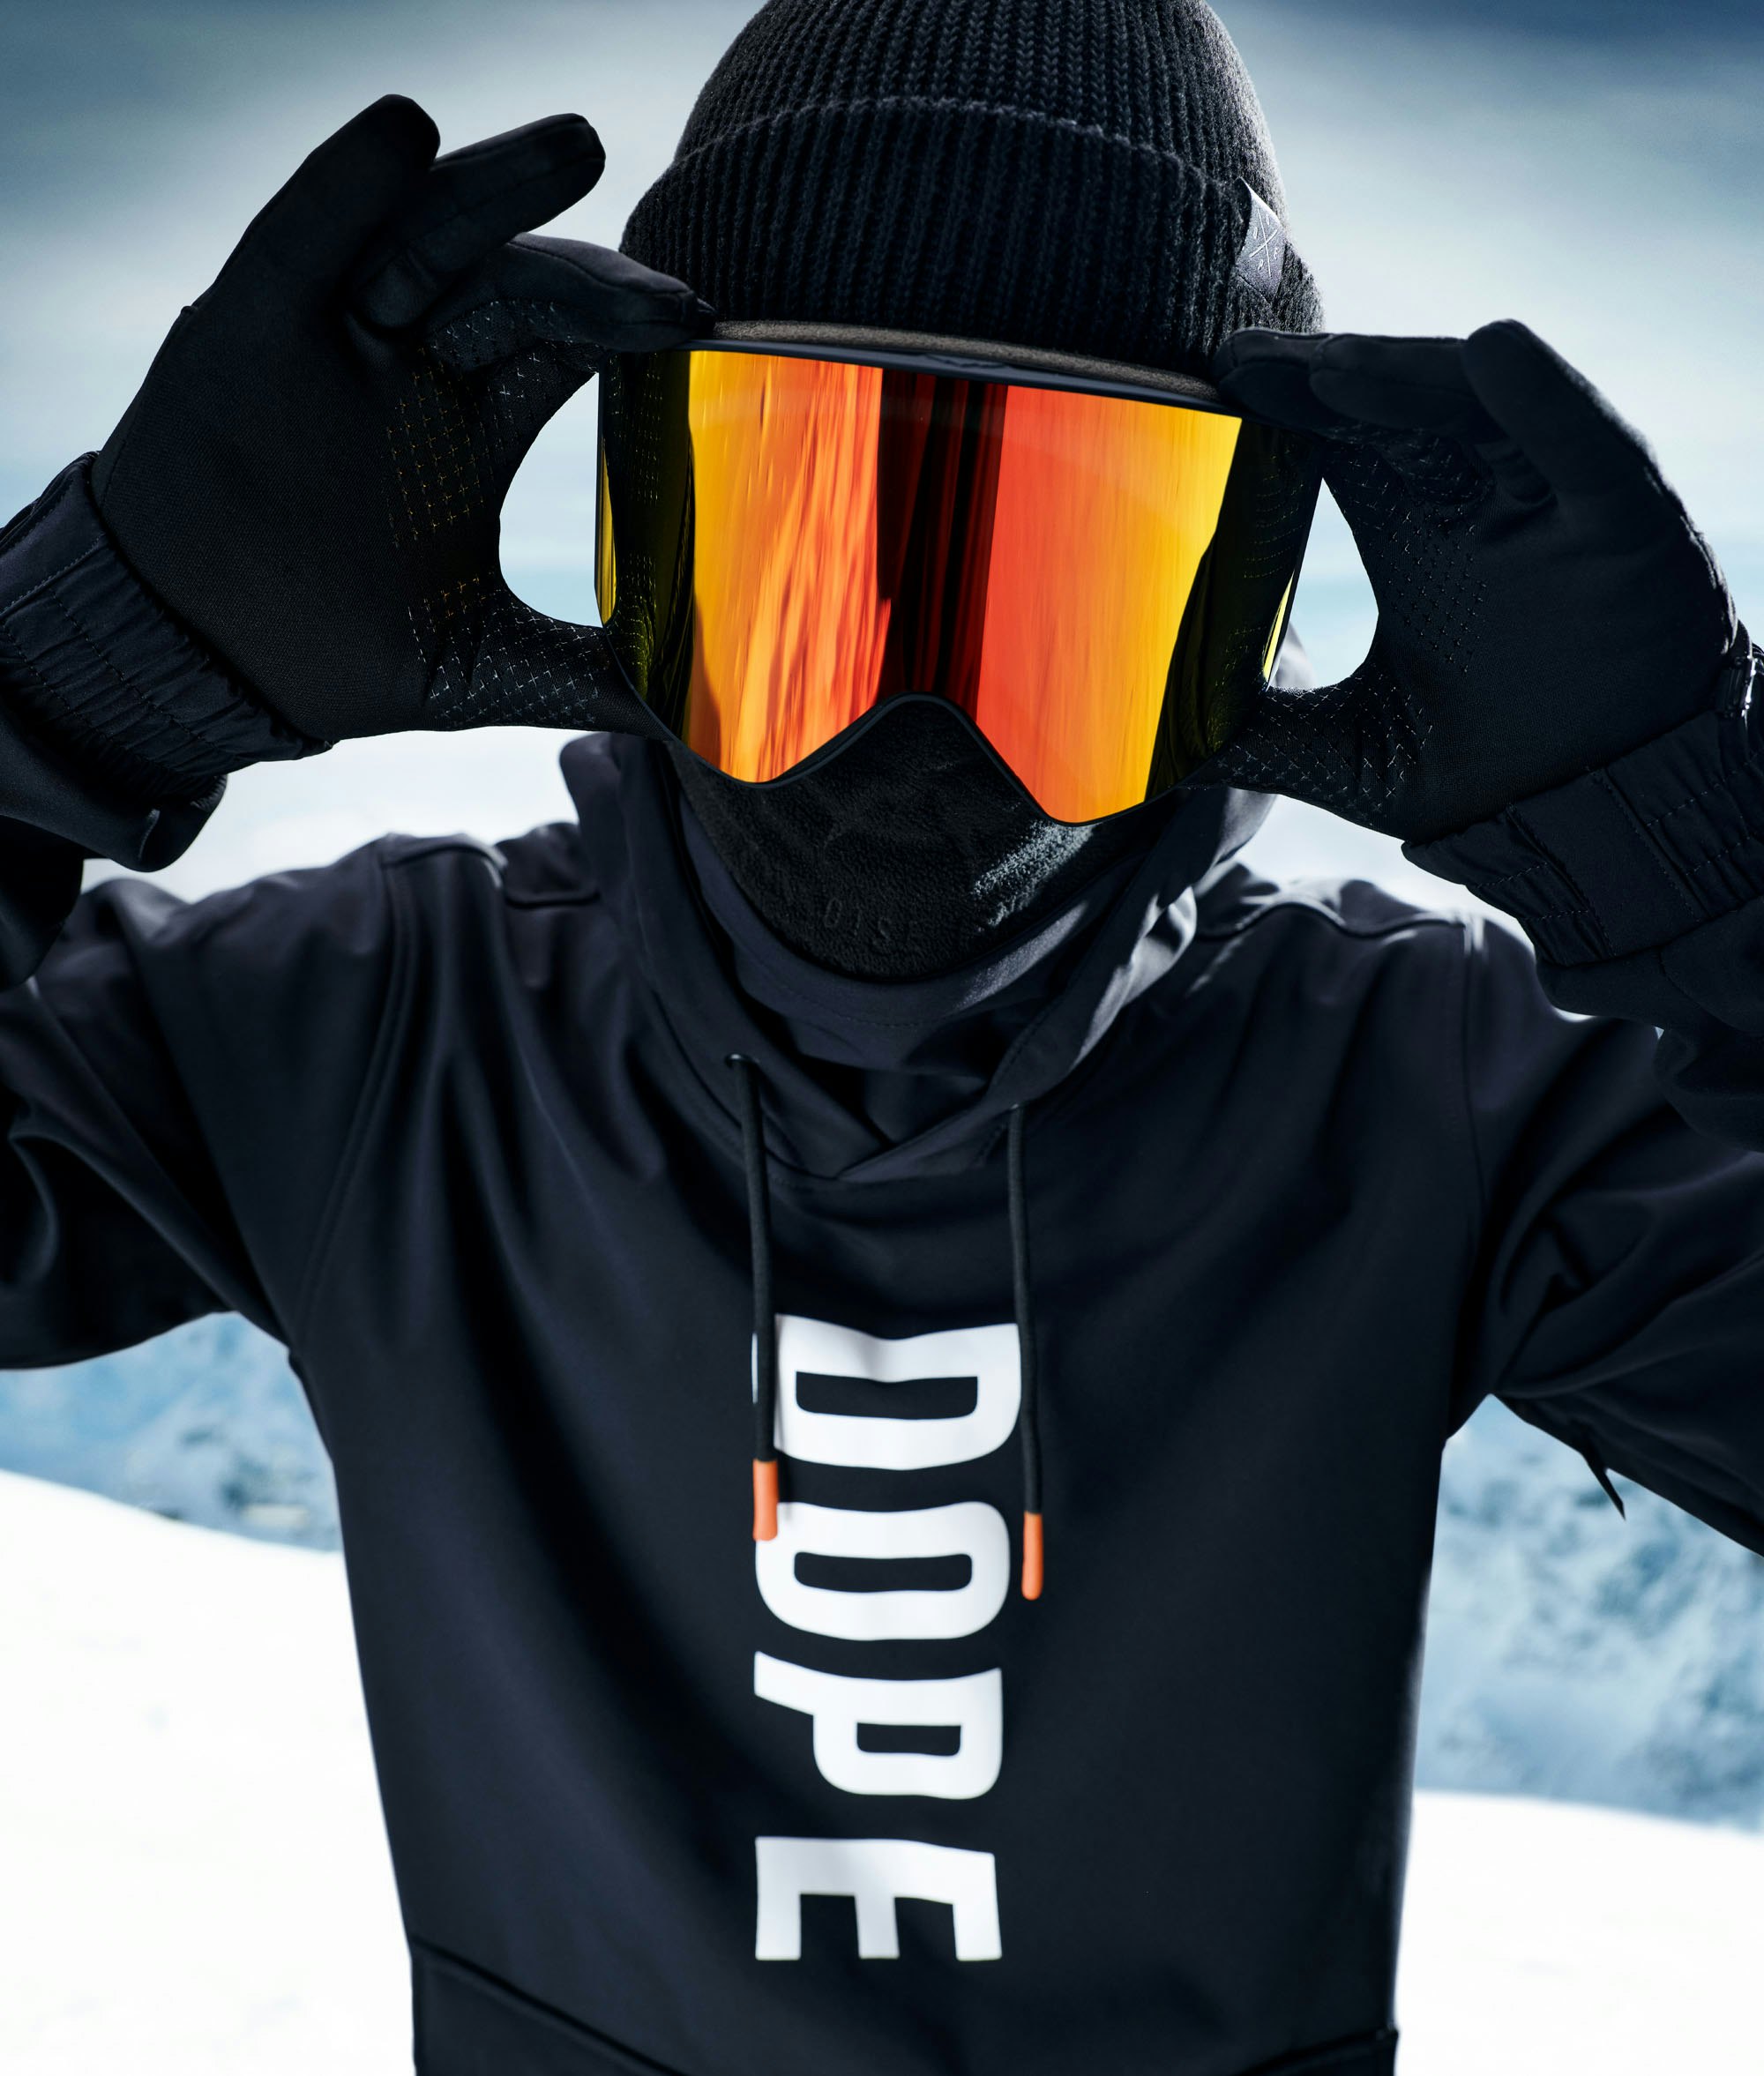 Cheap Ski Goggles Are a Pain. Invest in These High-Tech Specs